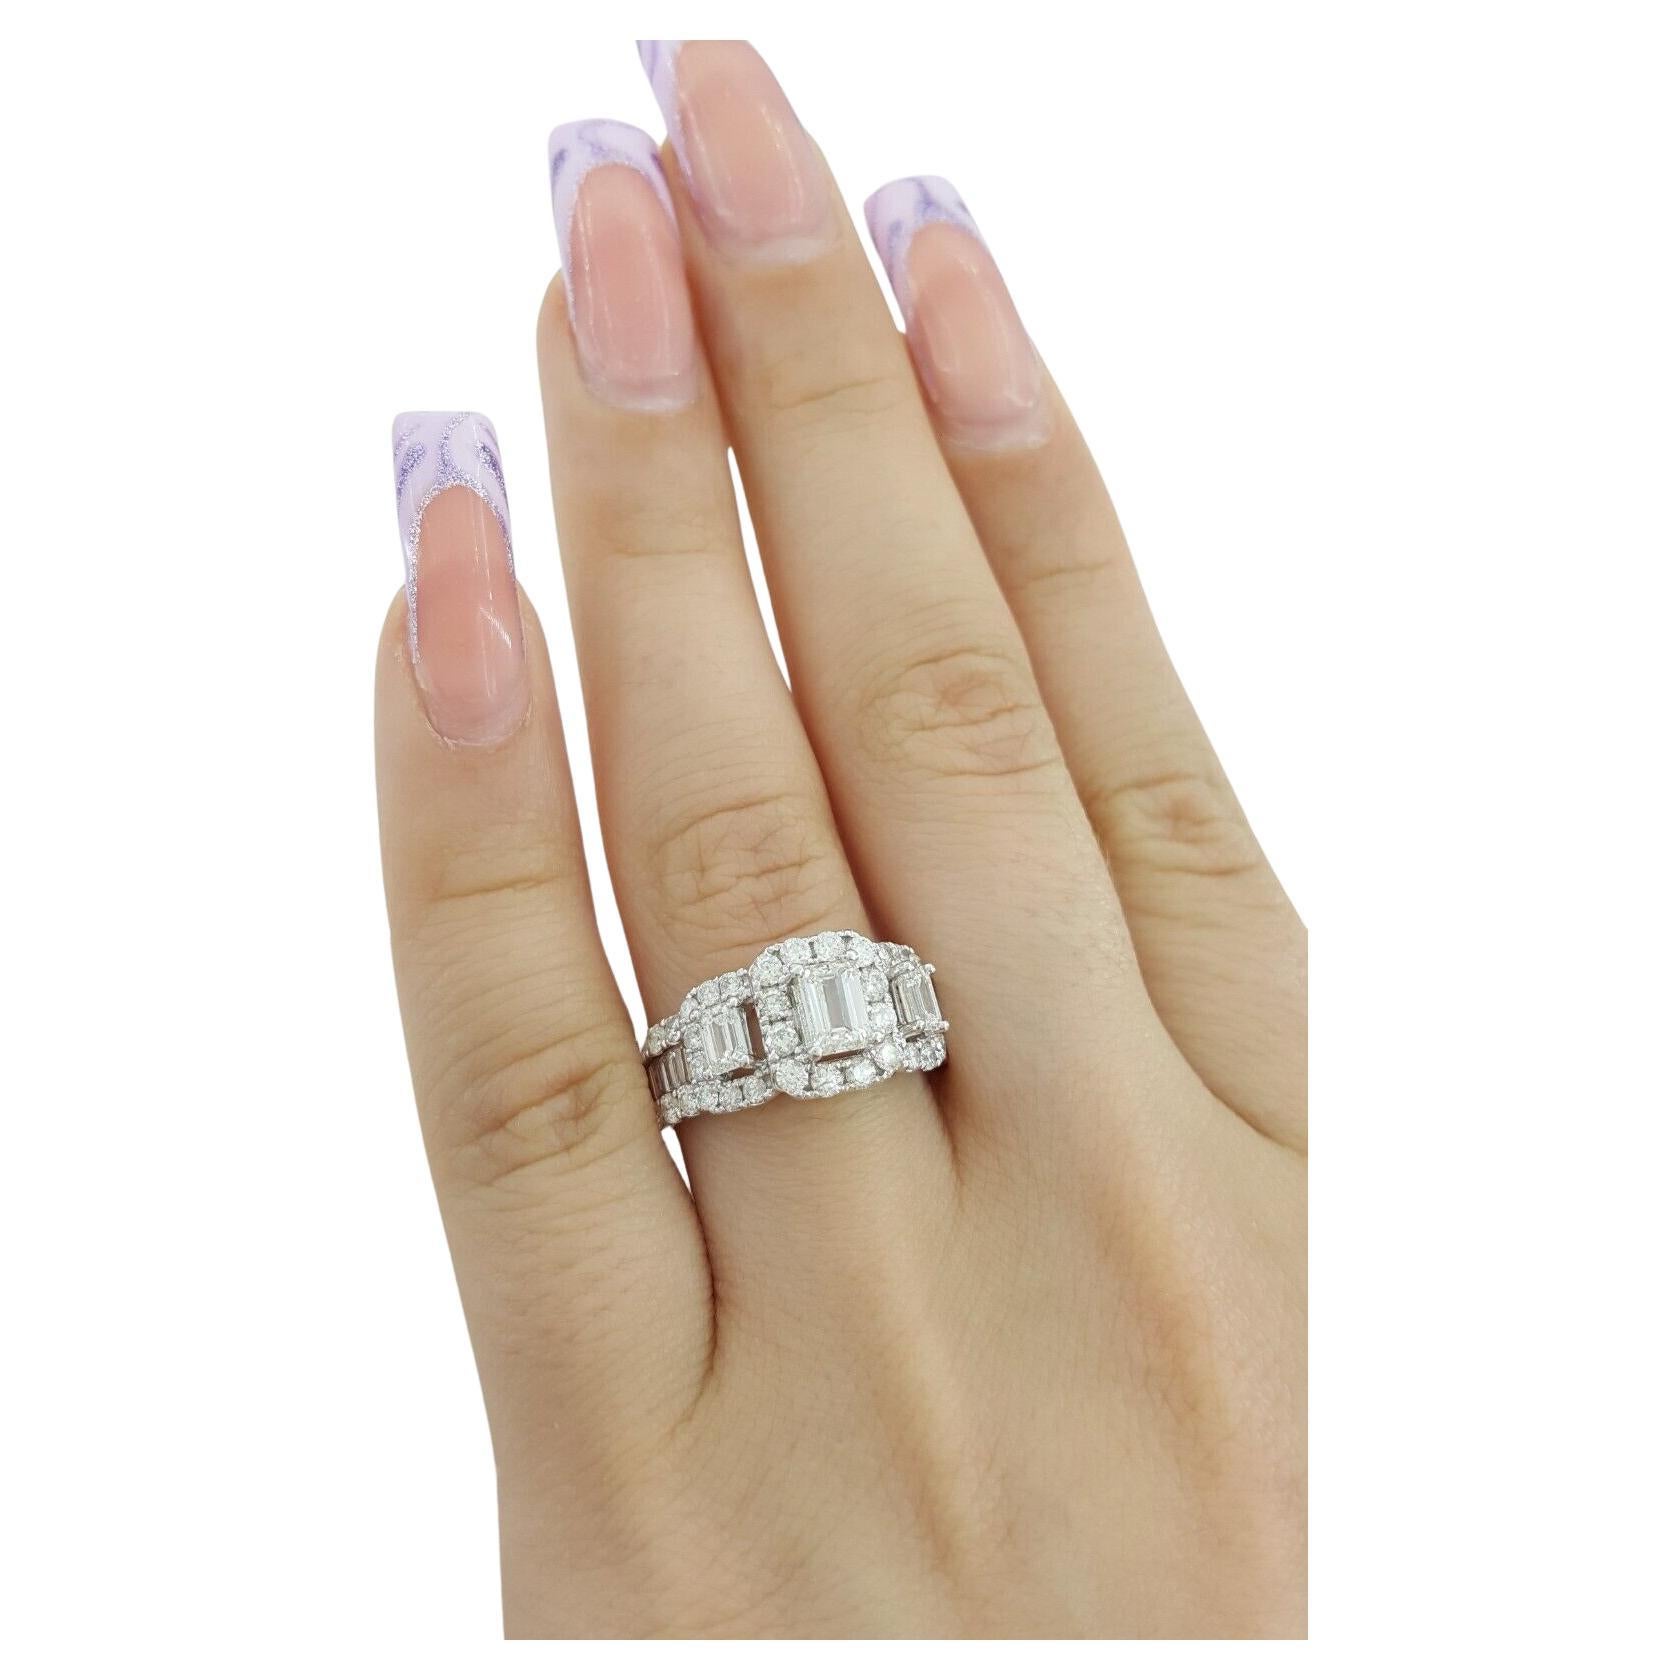 2.01 ct total weight Emerald Cut Diamond Three Stone Halo Engagement Ring in 14K White Gold.
The ring weighs 5.2 grams, size 7, the 3 Natural Emerald Cut center diamonds weigh ~0.87 ct total weight, G-I in color, VS-SI2 in clarity.
There are 14